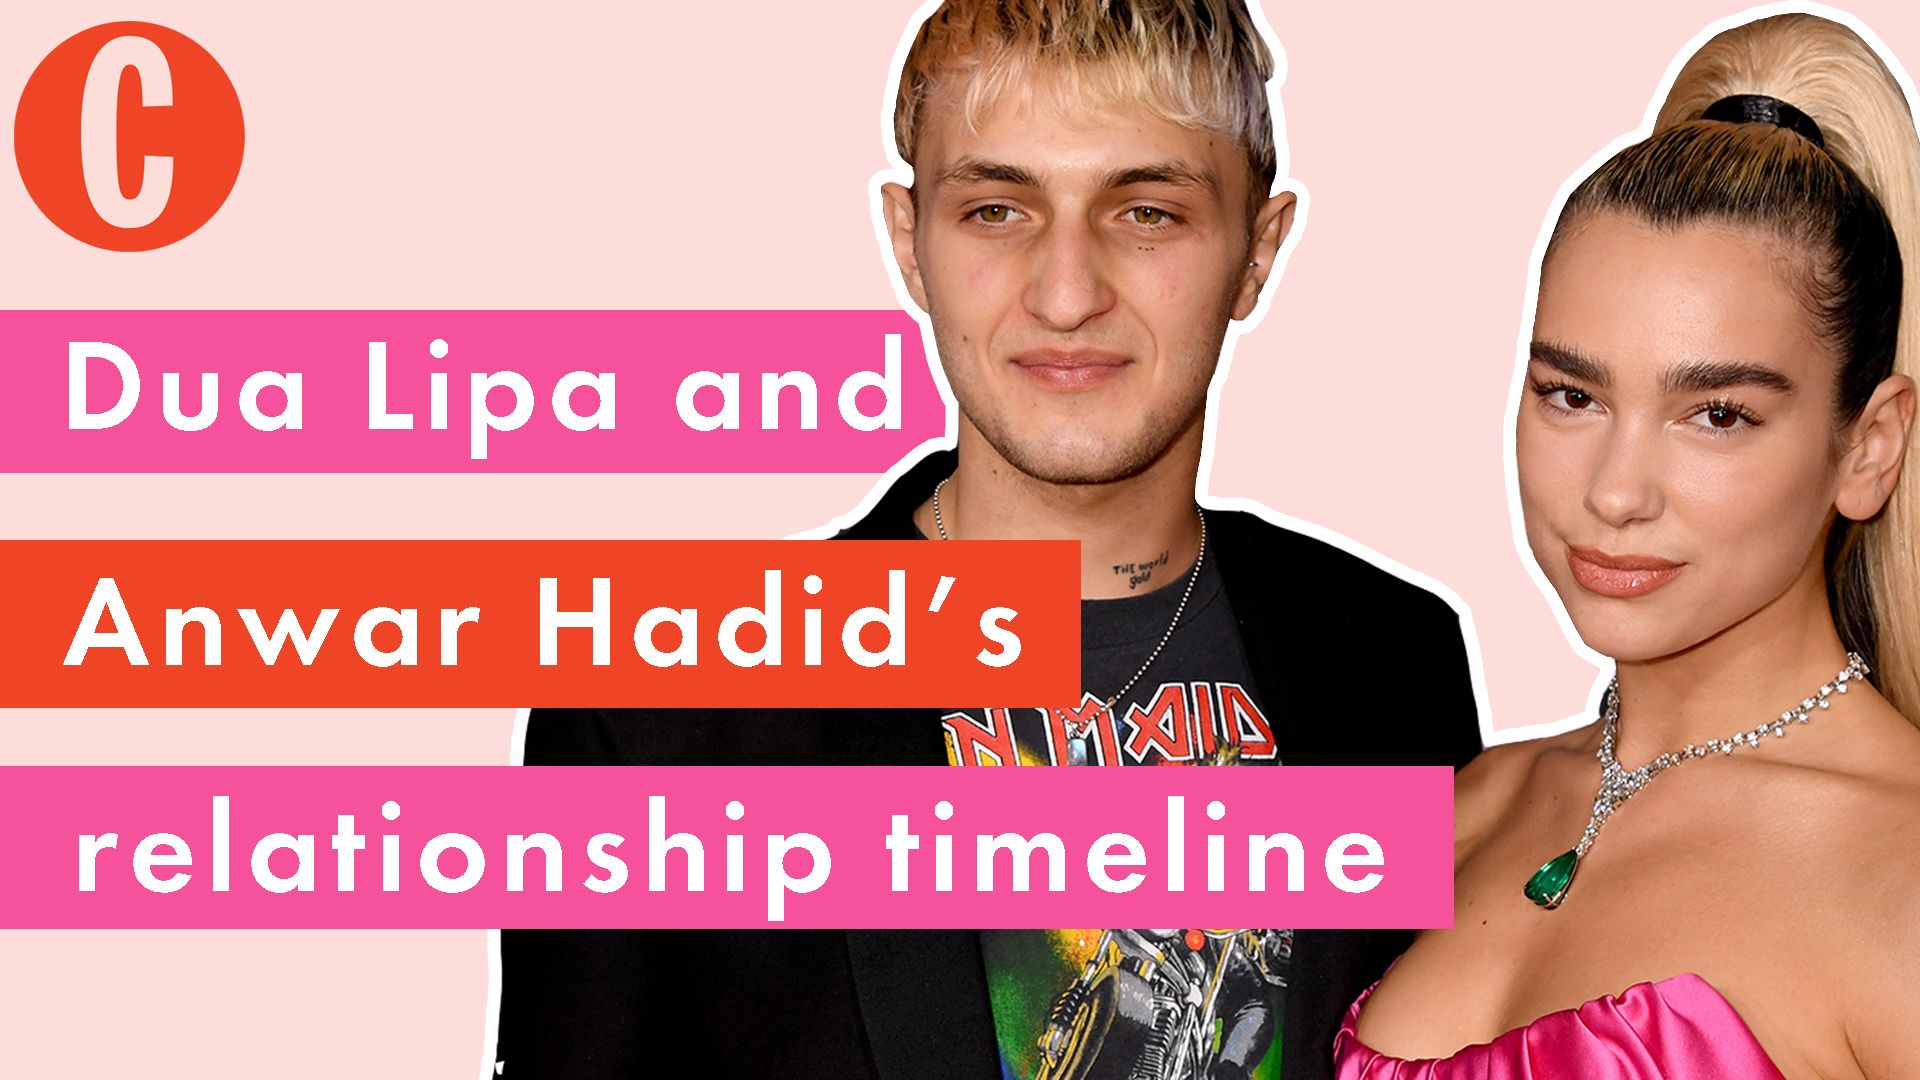 Rumor Has It Dua Lipa Has a New Boyfriend, and He Used to Date Another  Famous Singer 👀